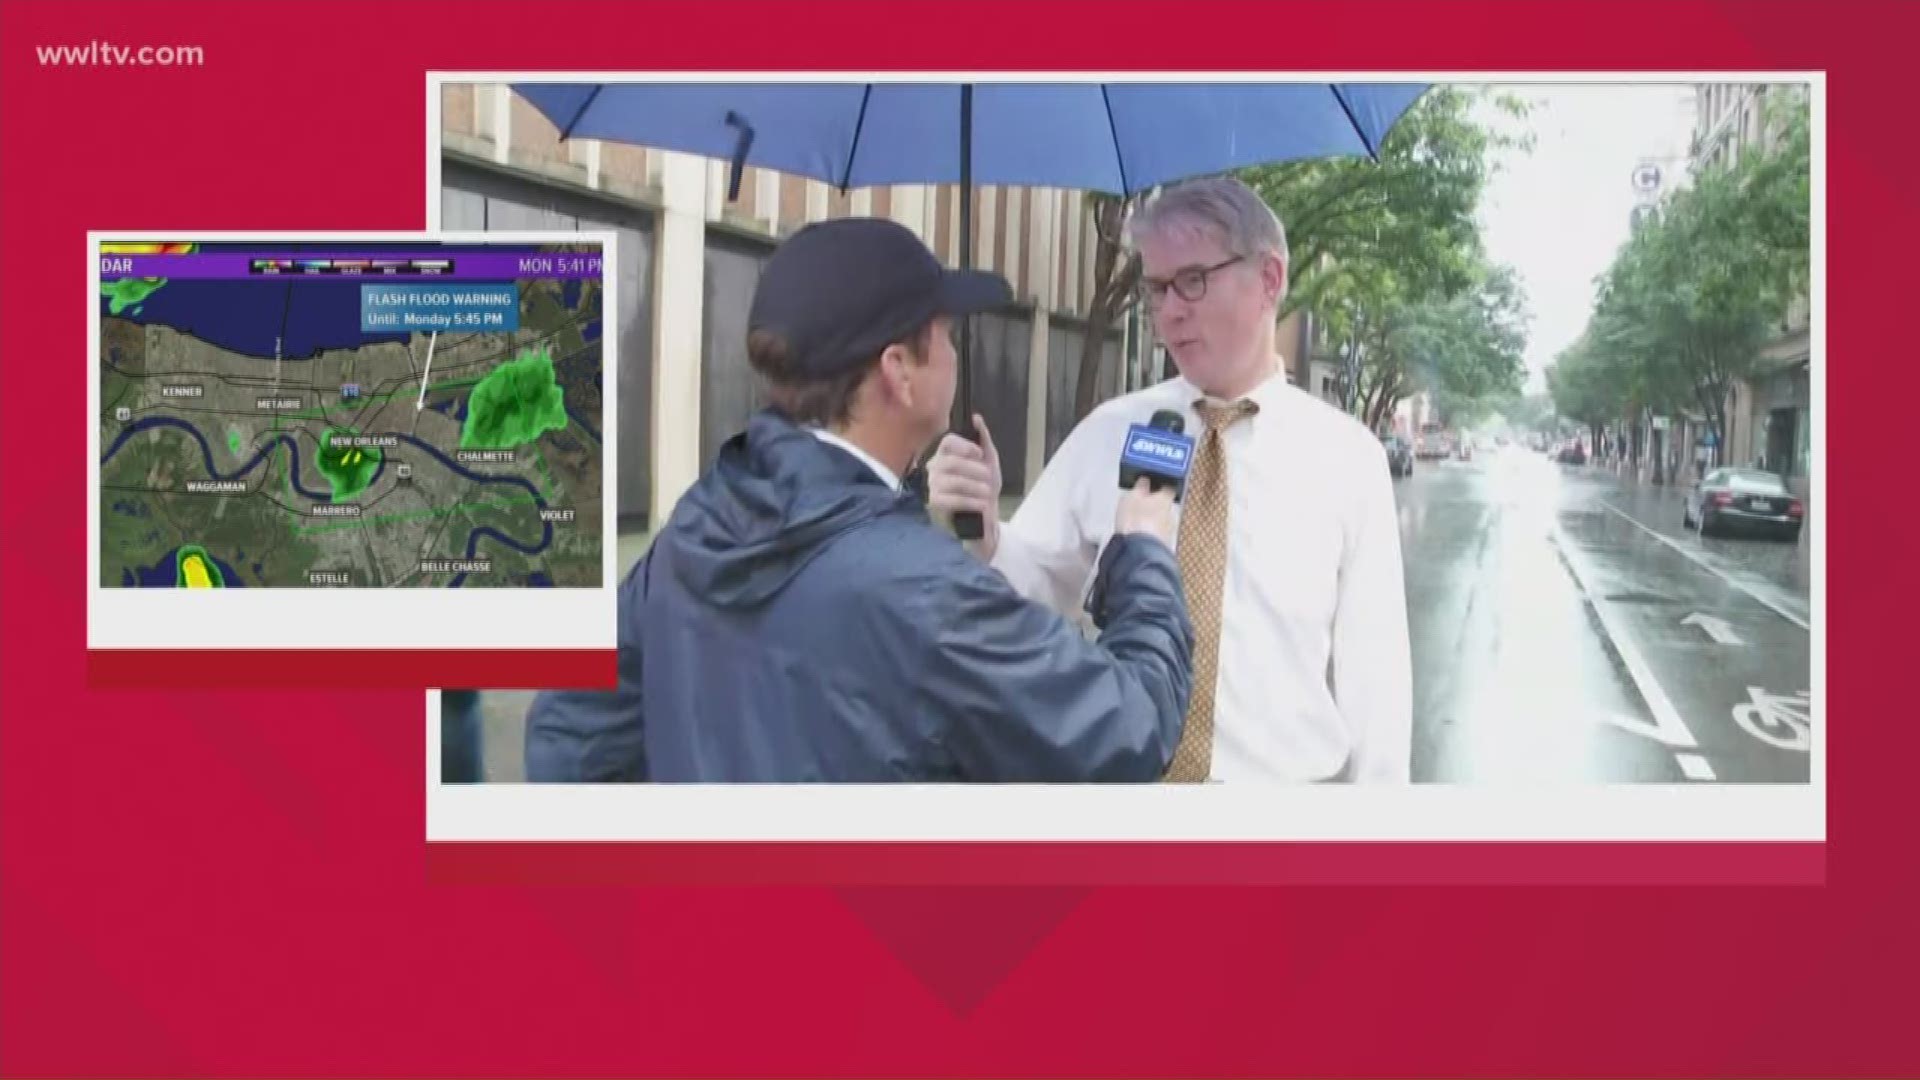 Paul Murphy speaks with Kurt Weigle, President & CEO of the Downtown Development District, about the flooding in the CBD.